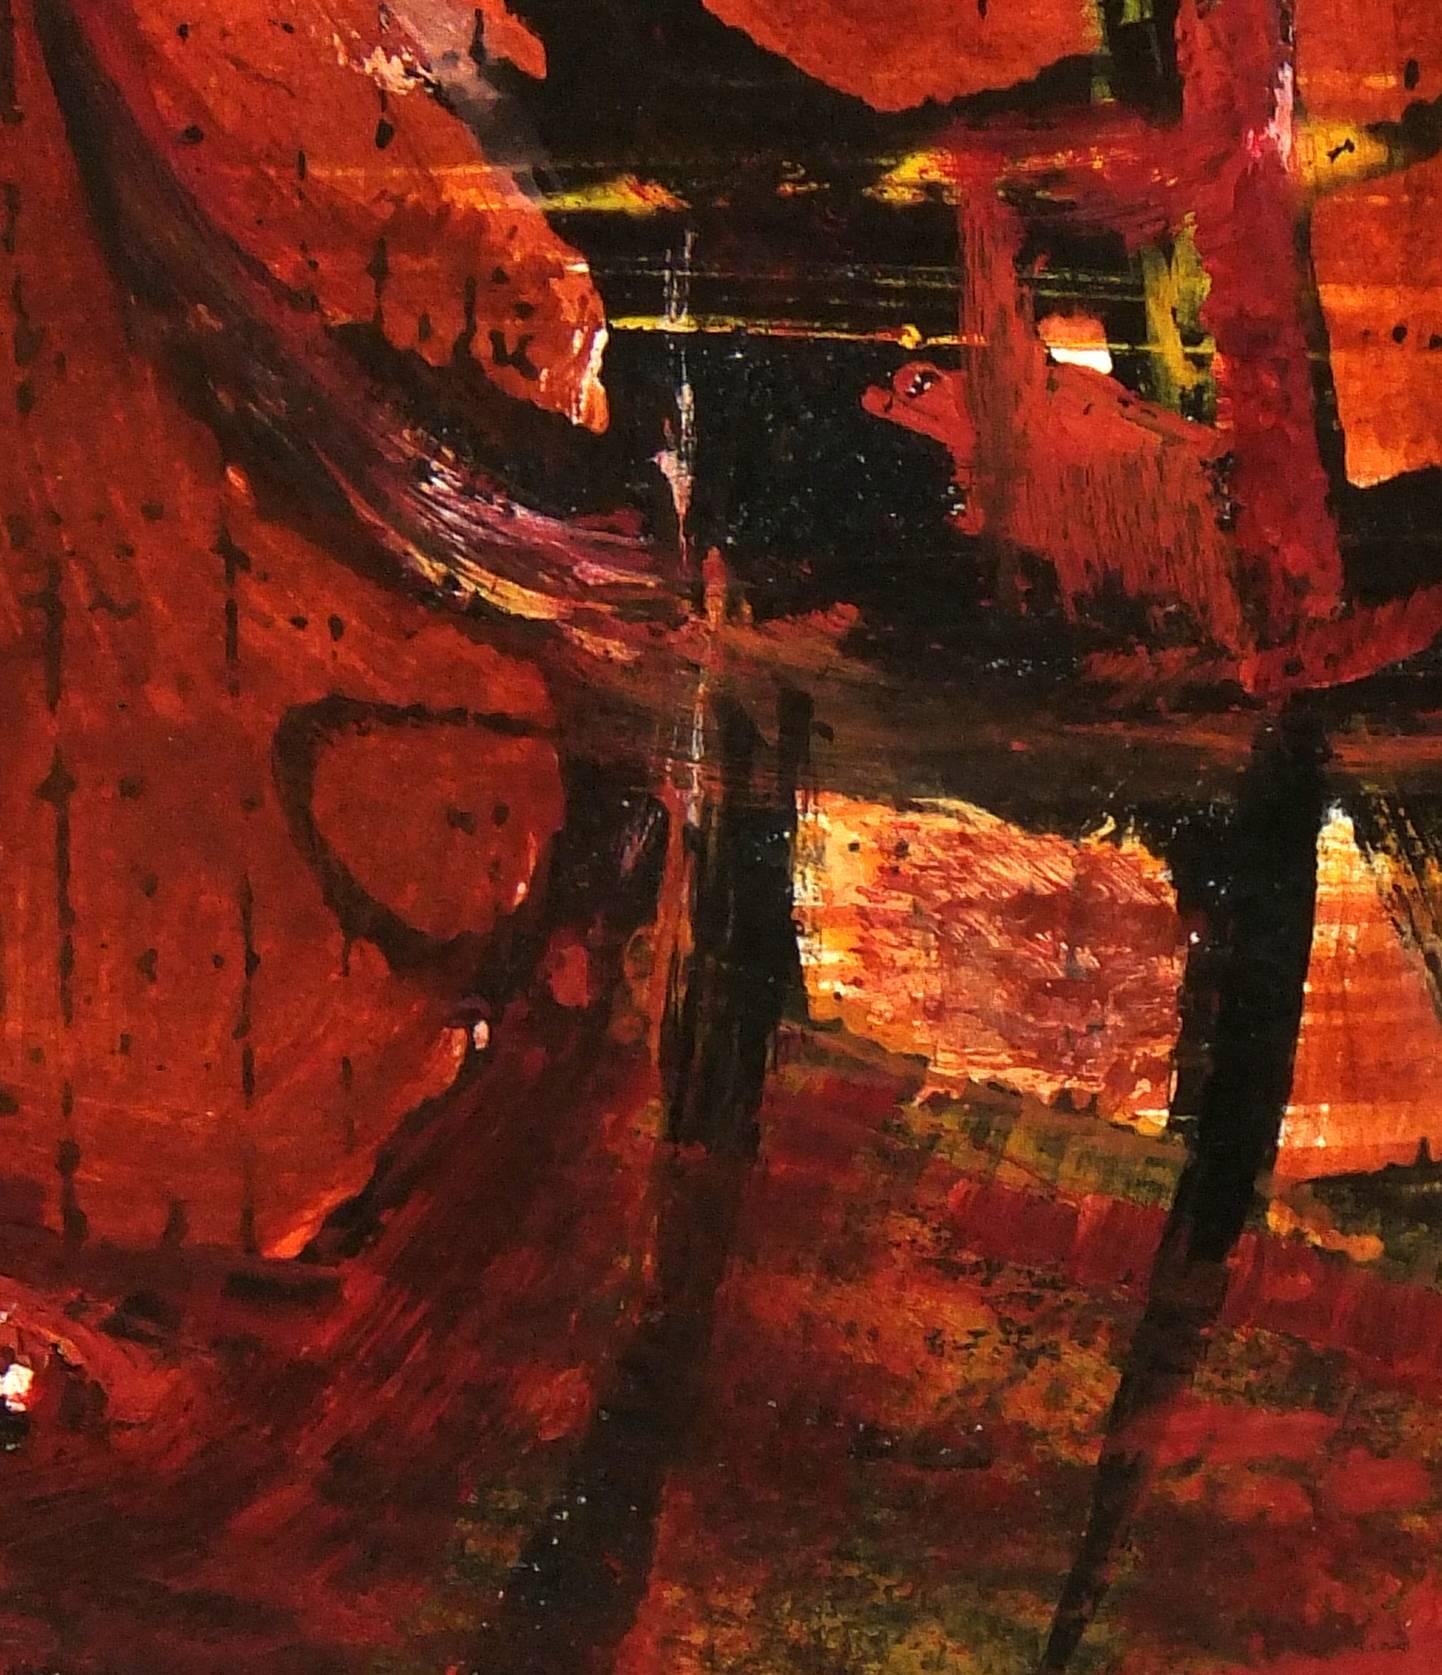 Vibrant Red and Orange Modern Abstract - Painting by C. Heino